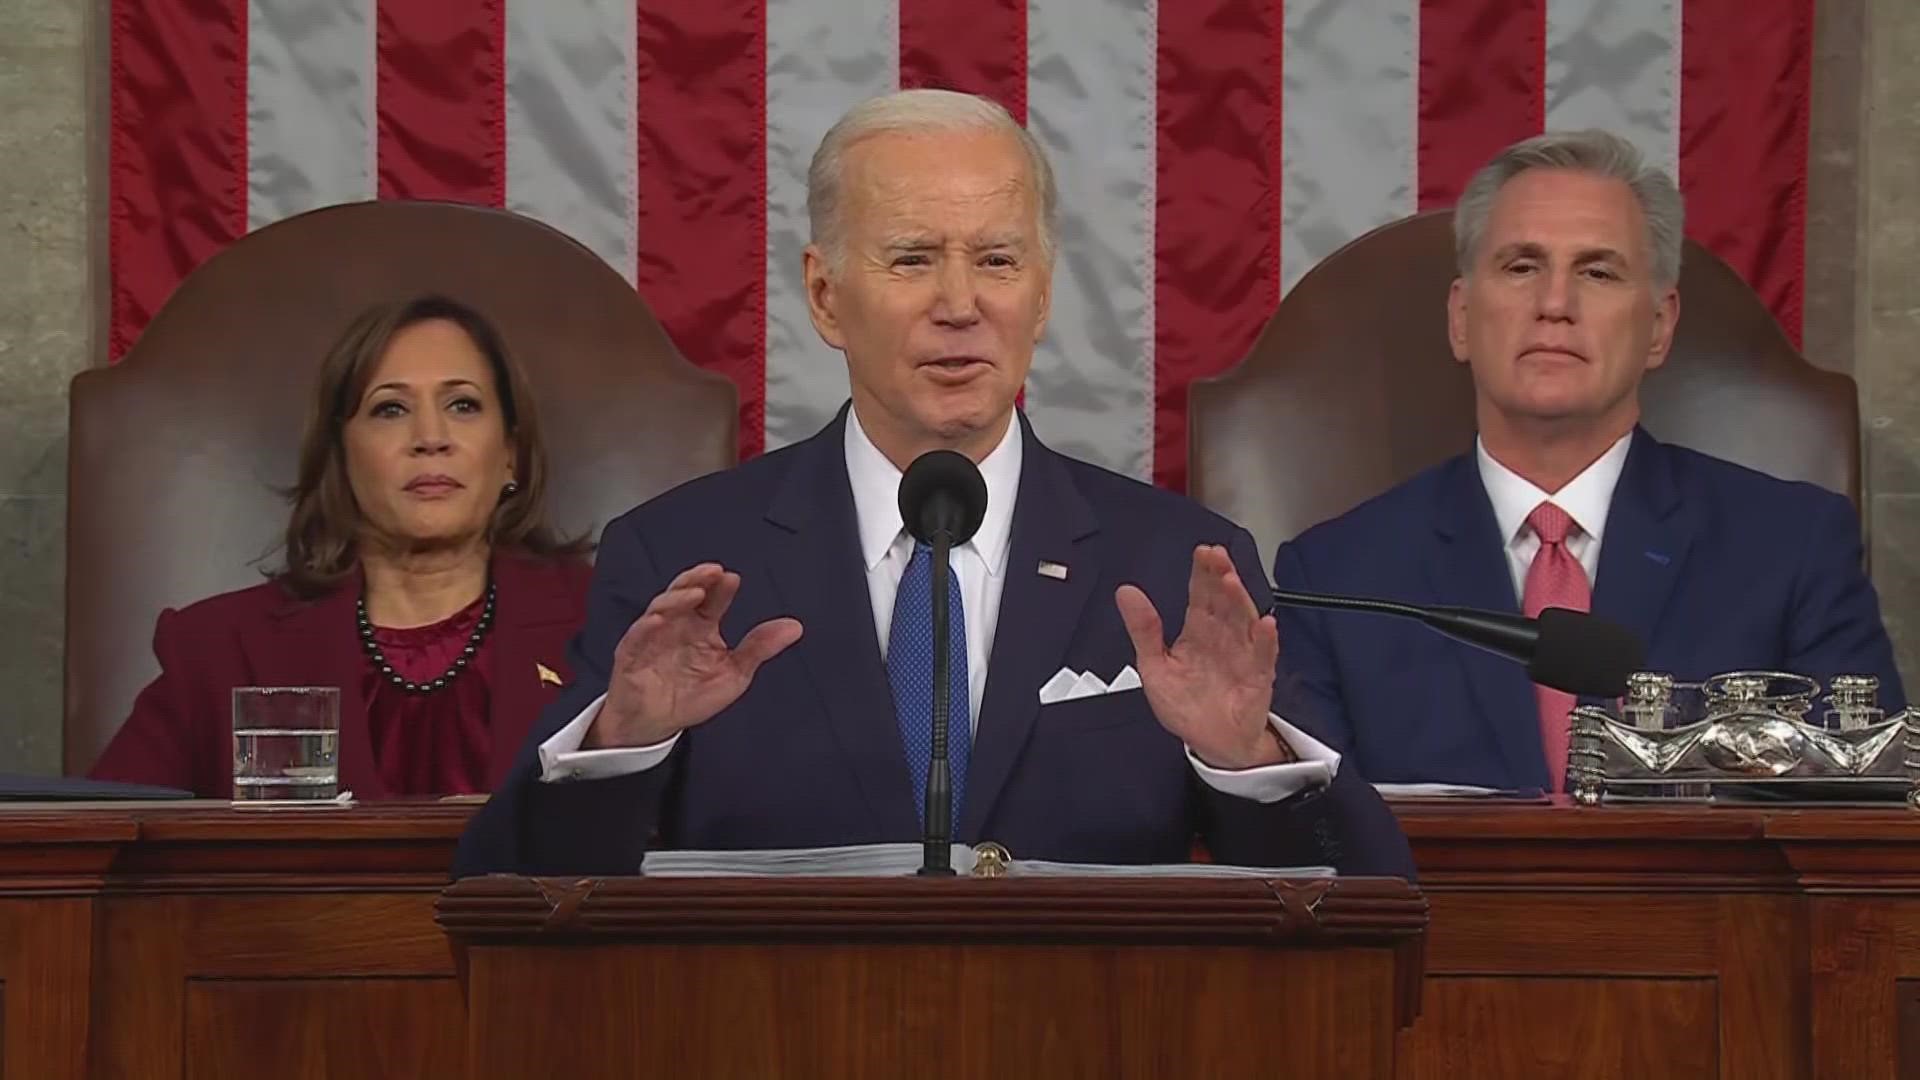 Biden wished lawmakers "lots of luck in your senior year" if any of them tried to repeal legislation from the Inflation Reduction Act.